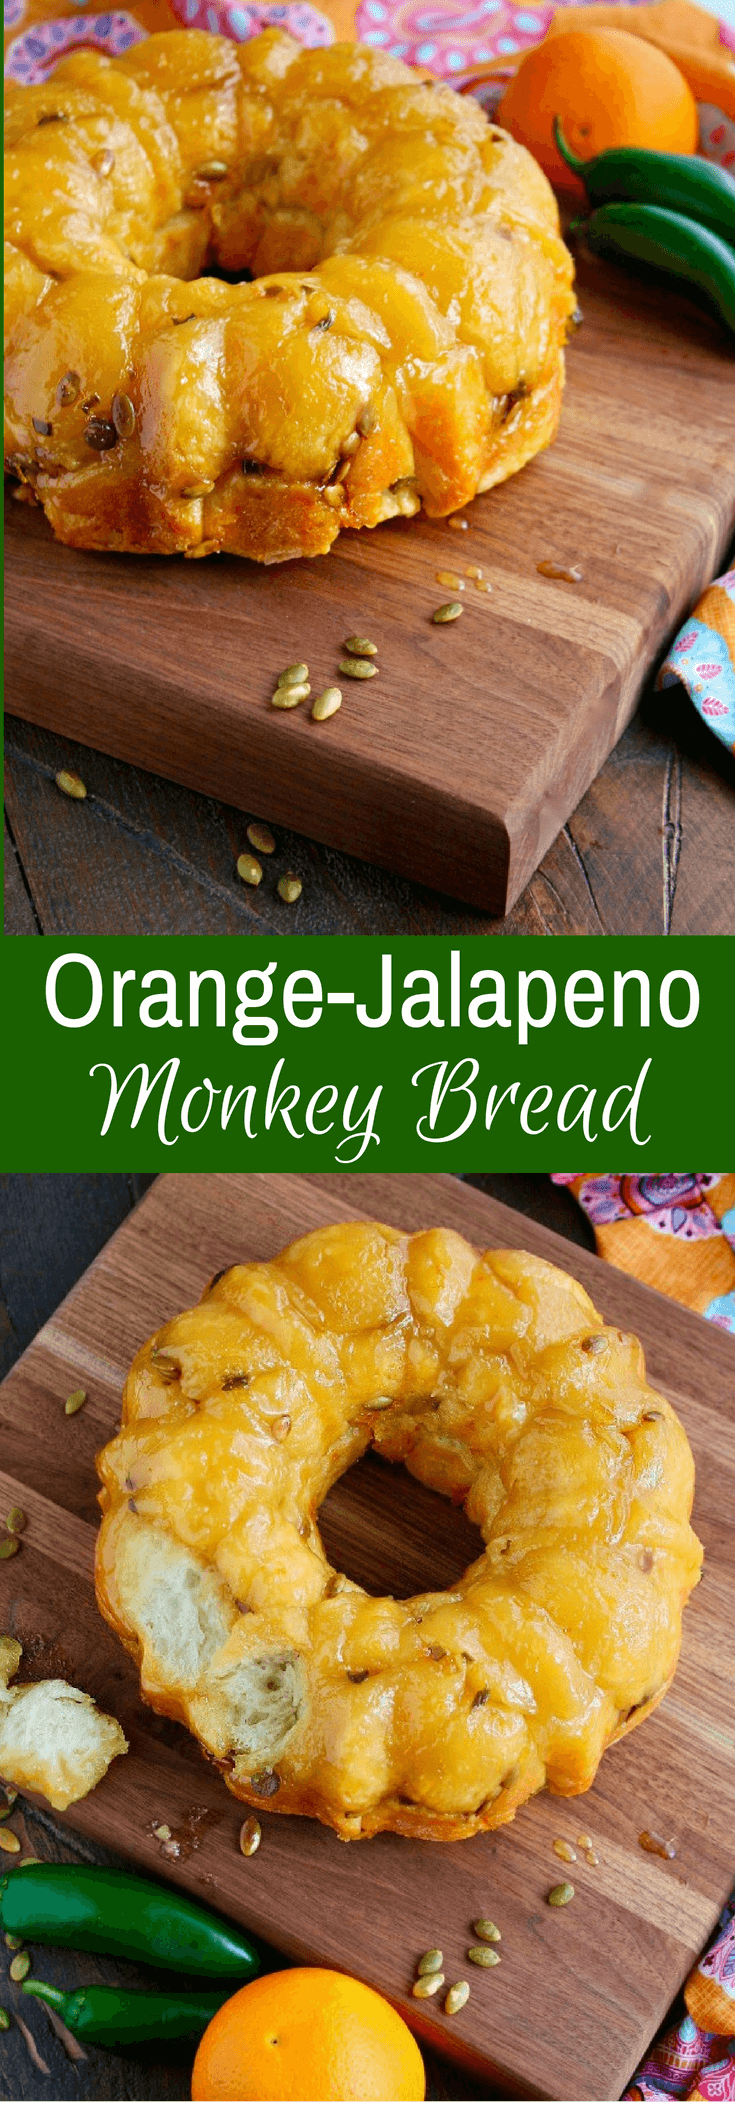 Looking for a fun treat with fabulous flavor? Try Orange-Jalapeño Monkey Bread with Pepitas!